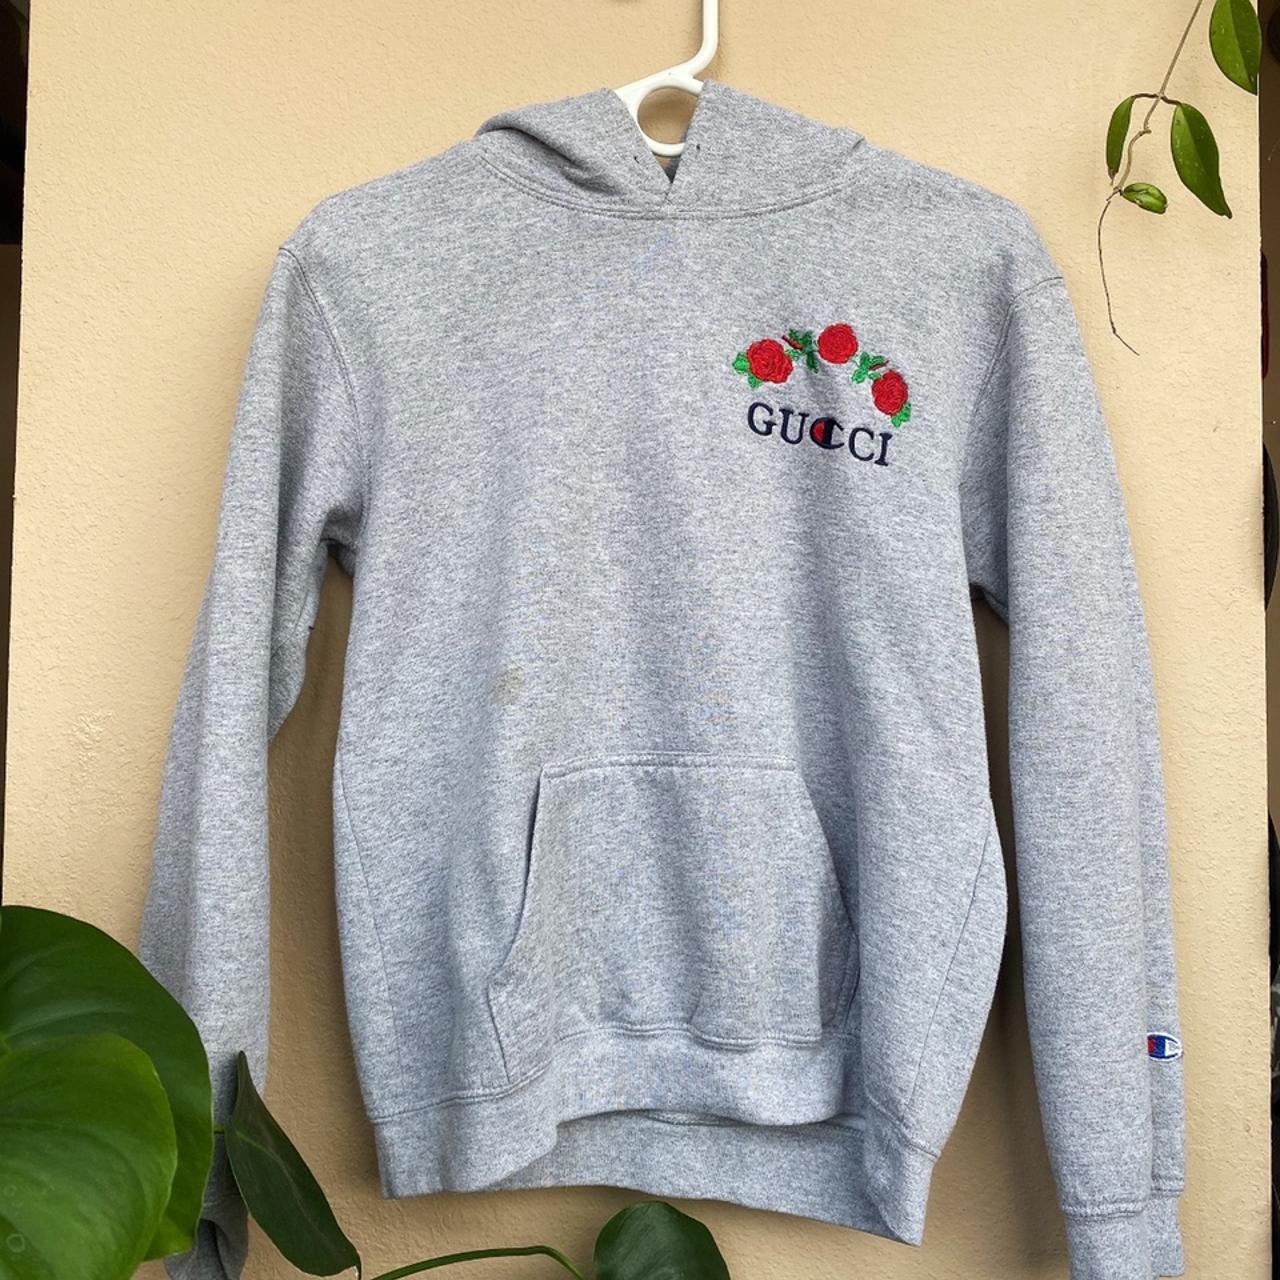 Gucci Champion grey hoodie in size small. I'm not... - Depop